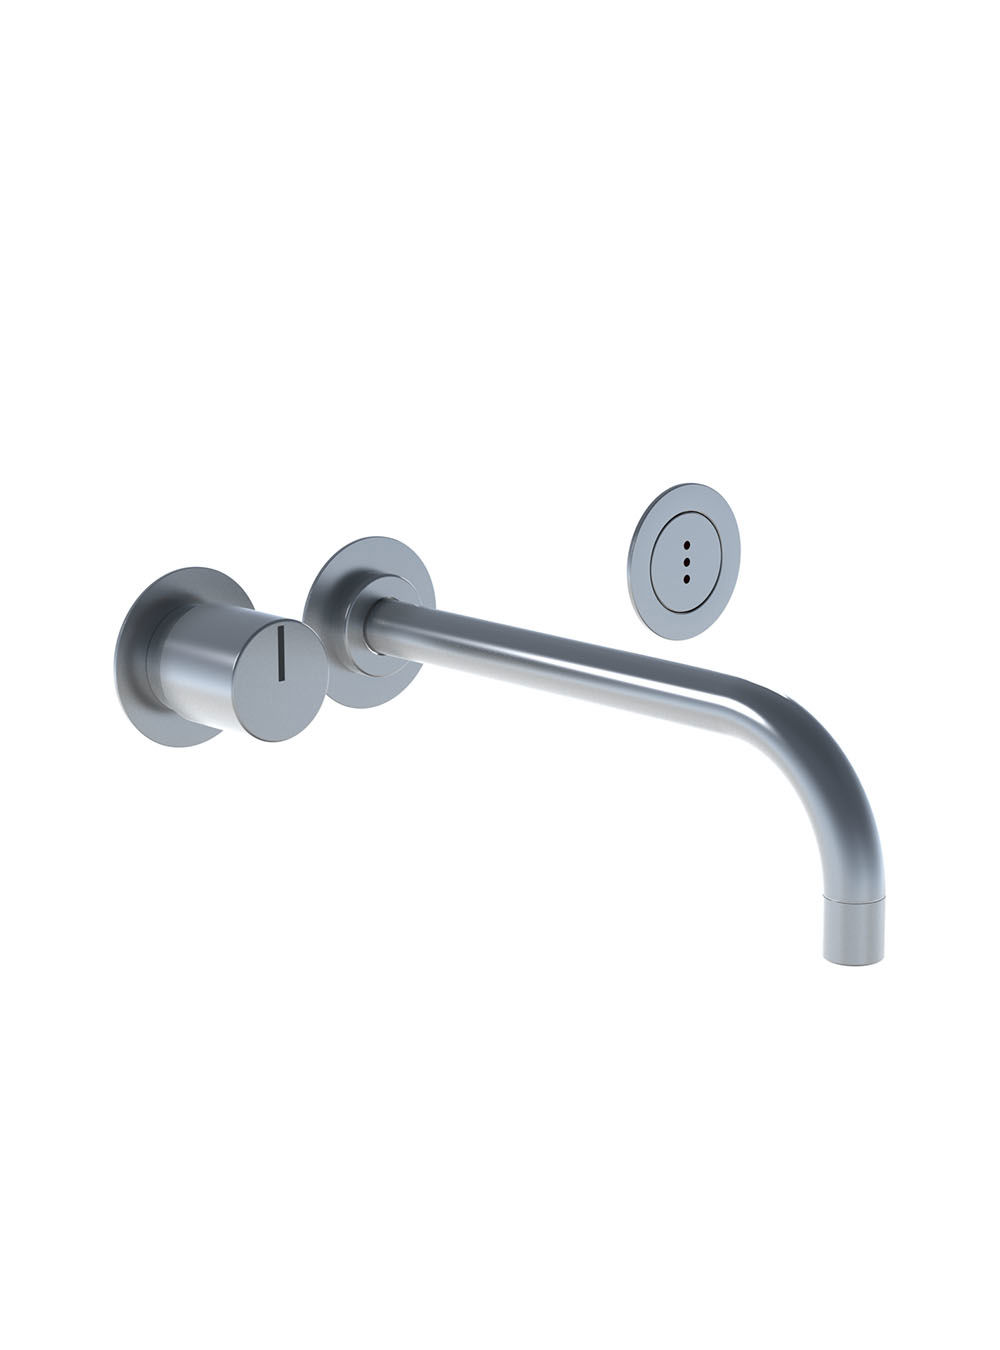 4921: Build-in basin mixer with on-off sensor for ‘hands free’ operation.Sensor aligned with wall. Valve b